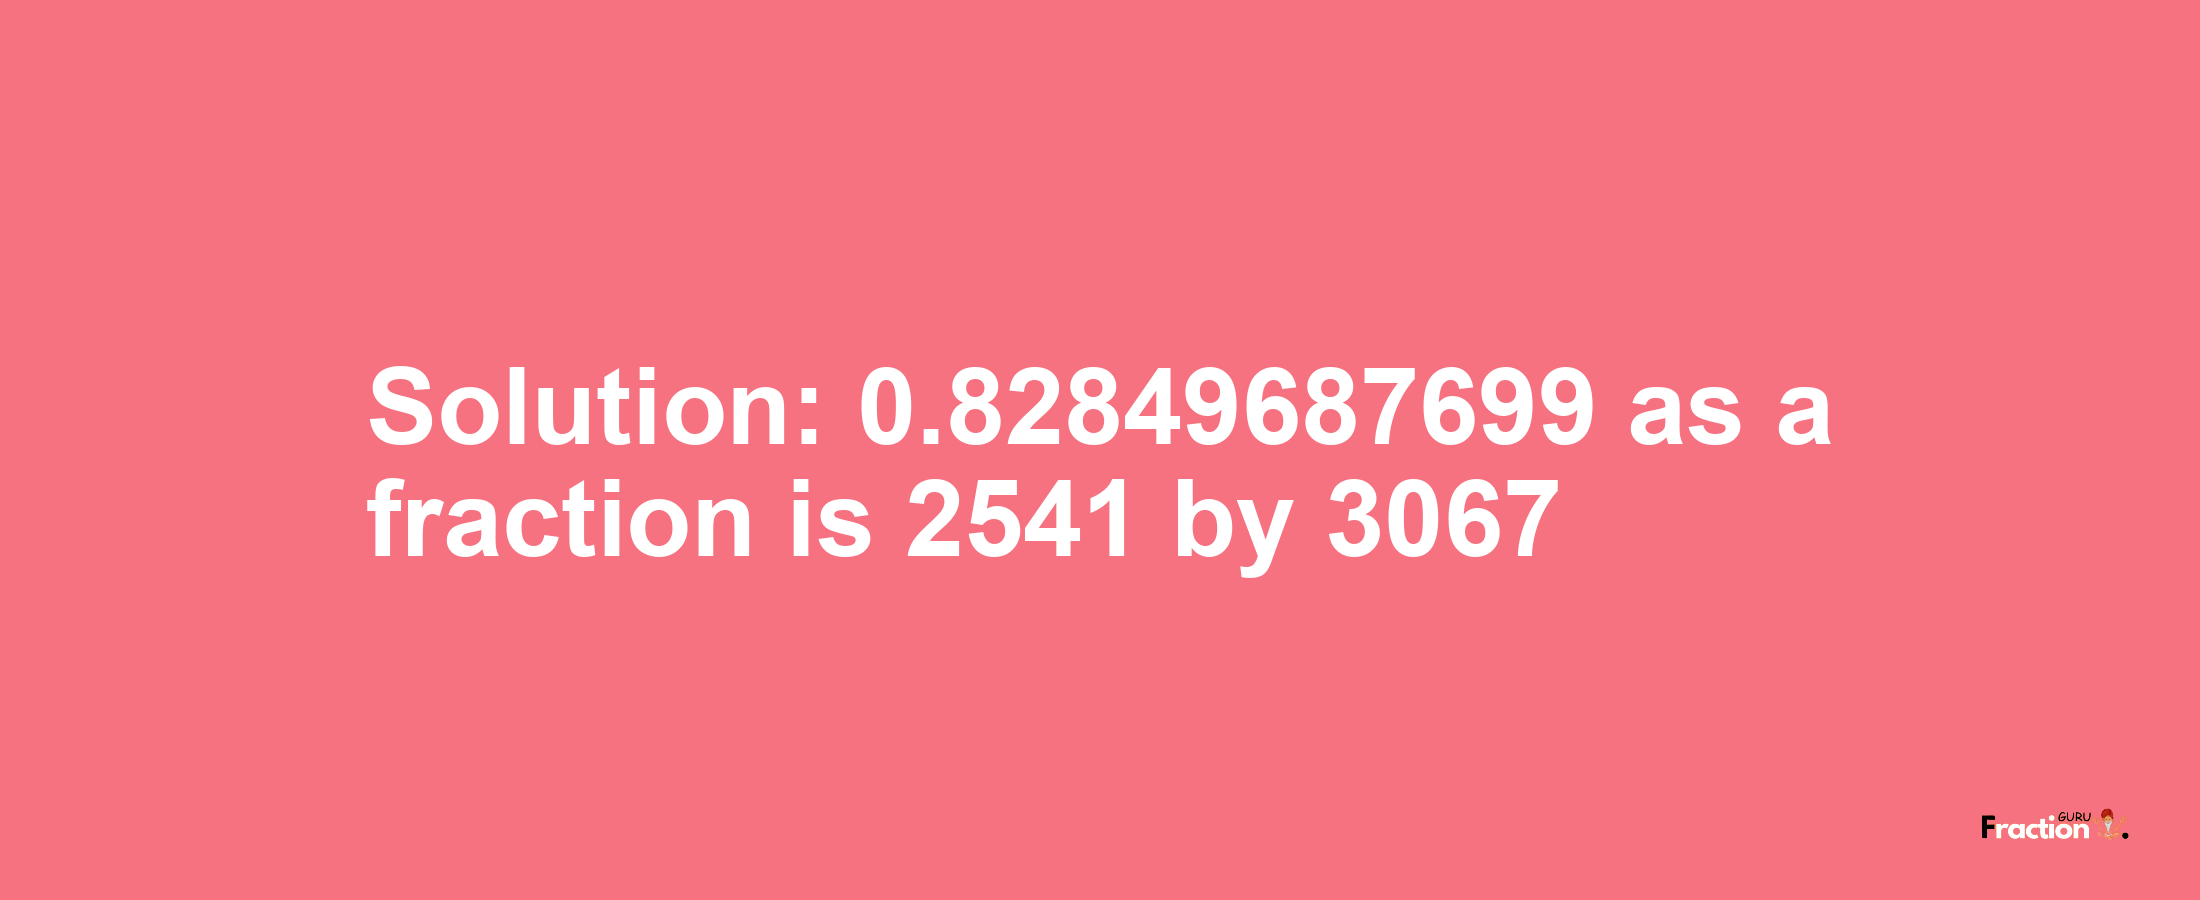 Solution:0.82849687699 as a fraction is 2541/3067